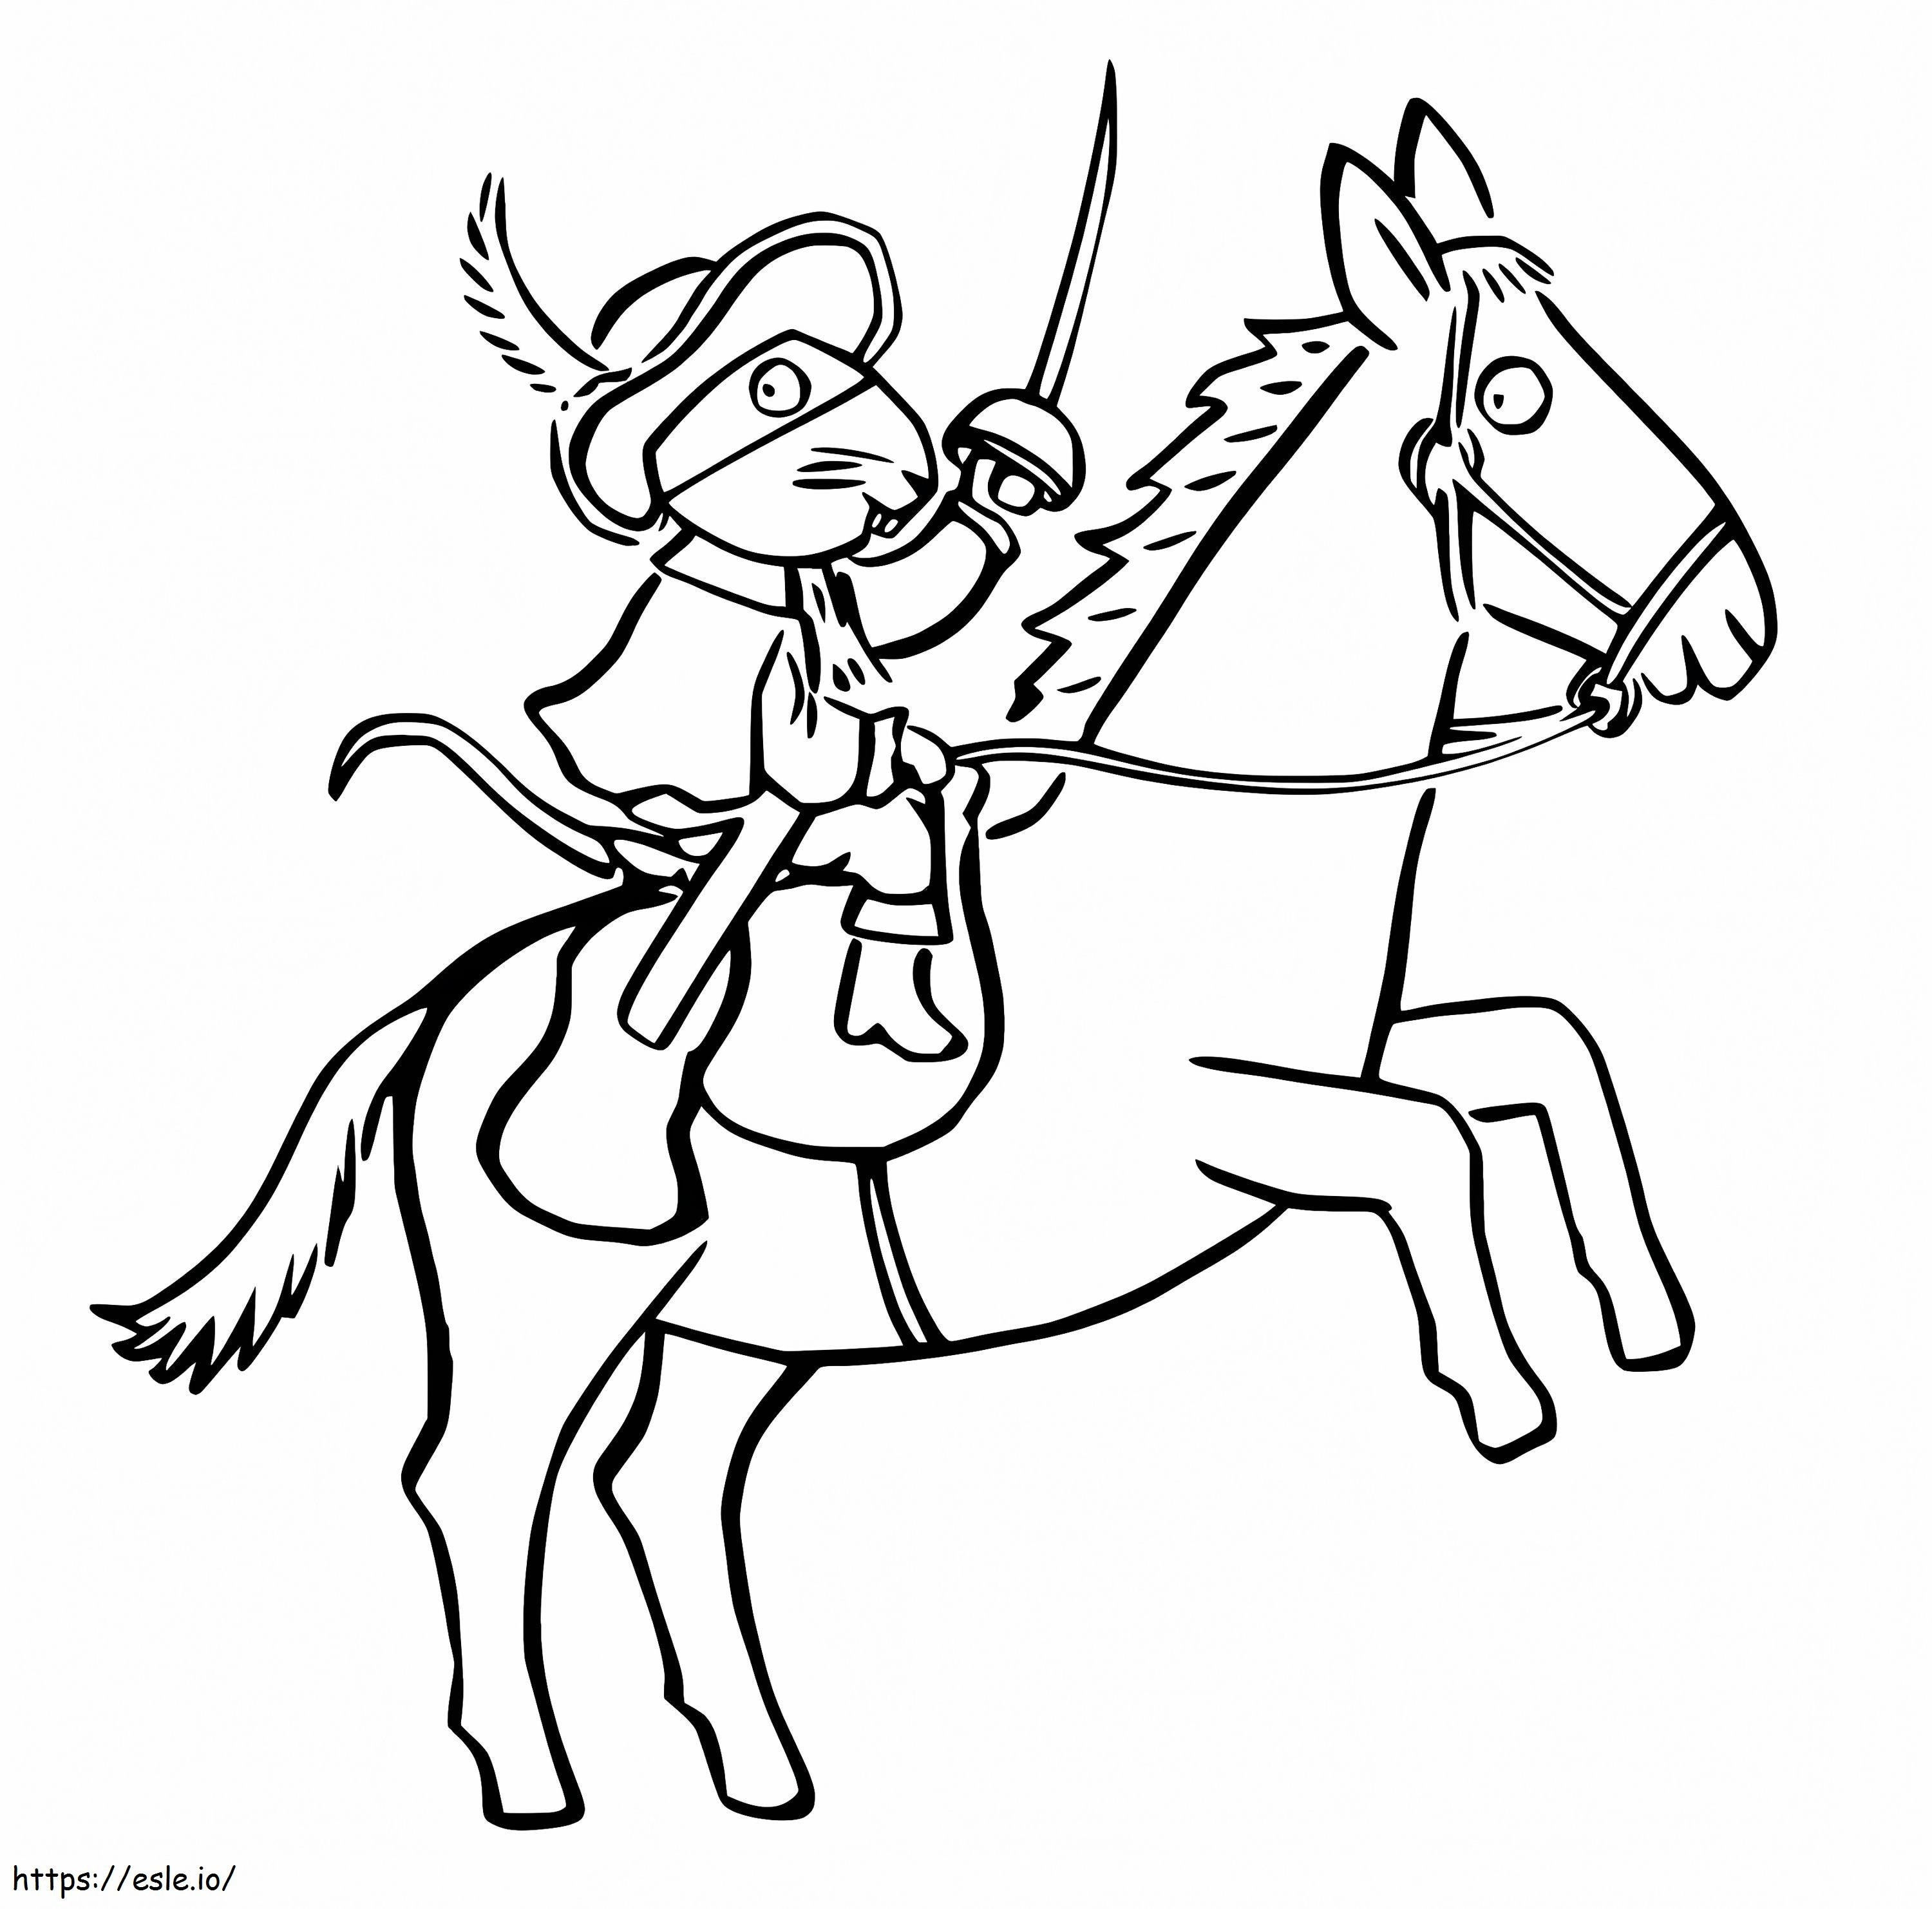 Highway Rat Riding Horse coloring page